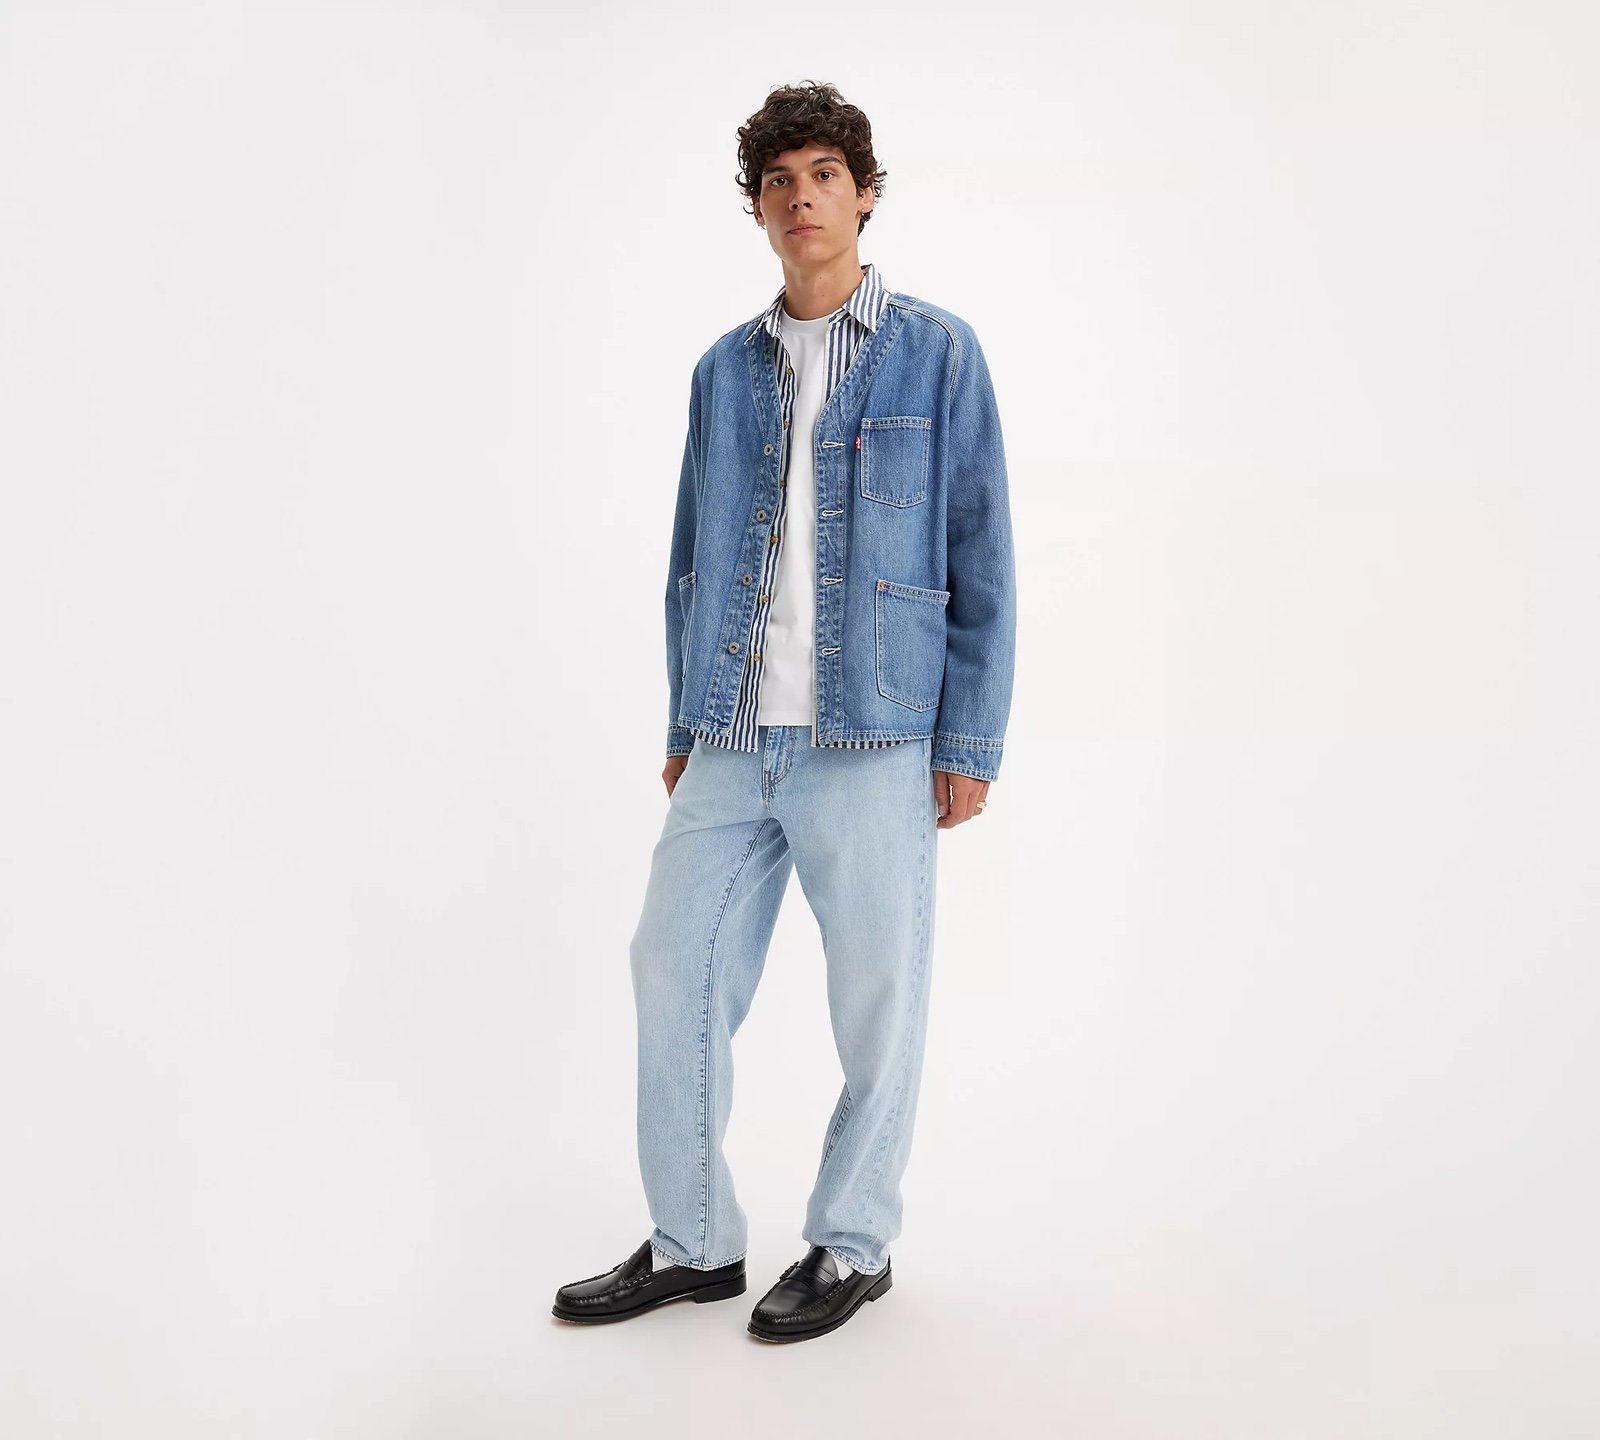 floor price Levi’s 568 stay loose krsnIHNHY online stor